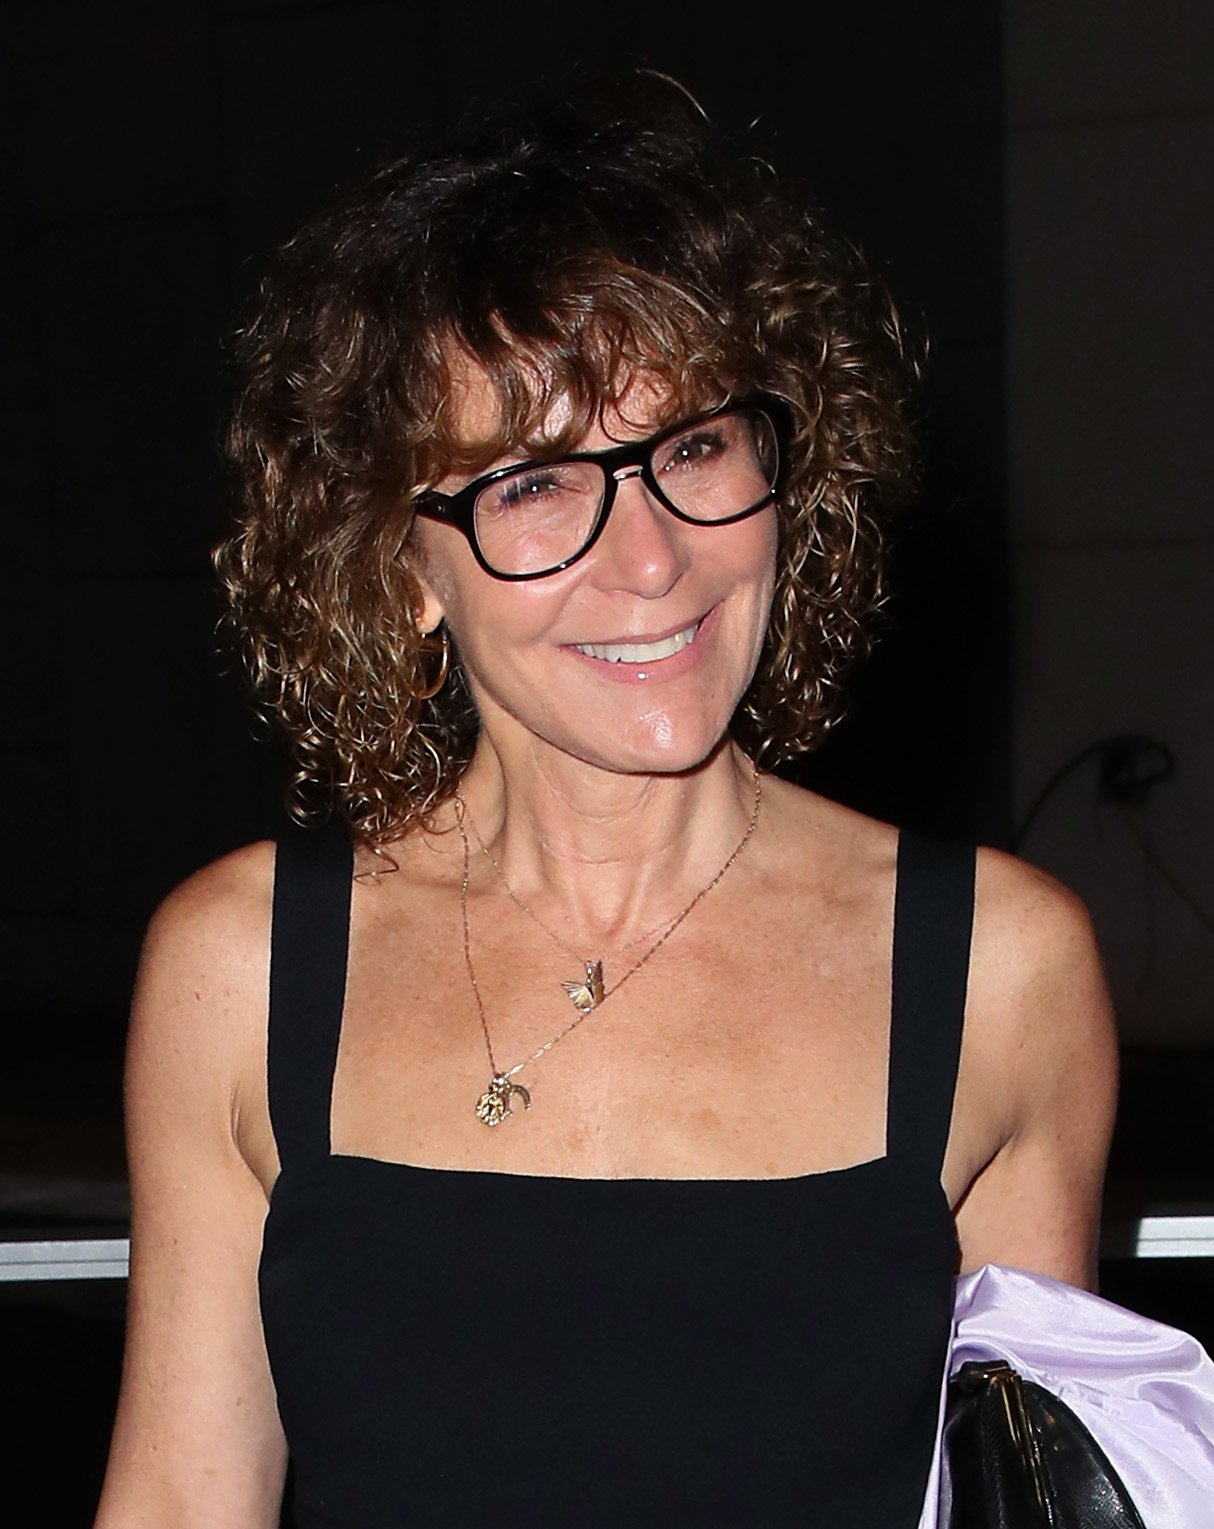 Jennifer Grey attends the Center Theatre Group's "A Play Is a Poem" opening night performance at Mark Taper Forum on September 21, 2019, in Los Angeles, California. | Source: Getty Images